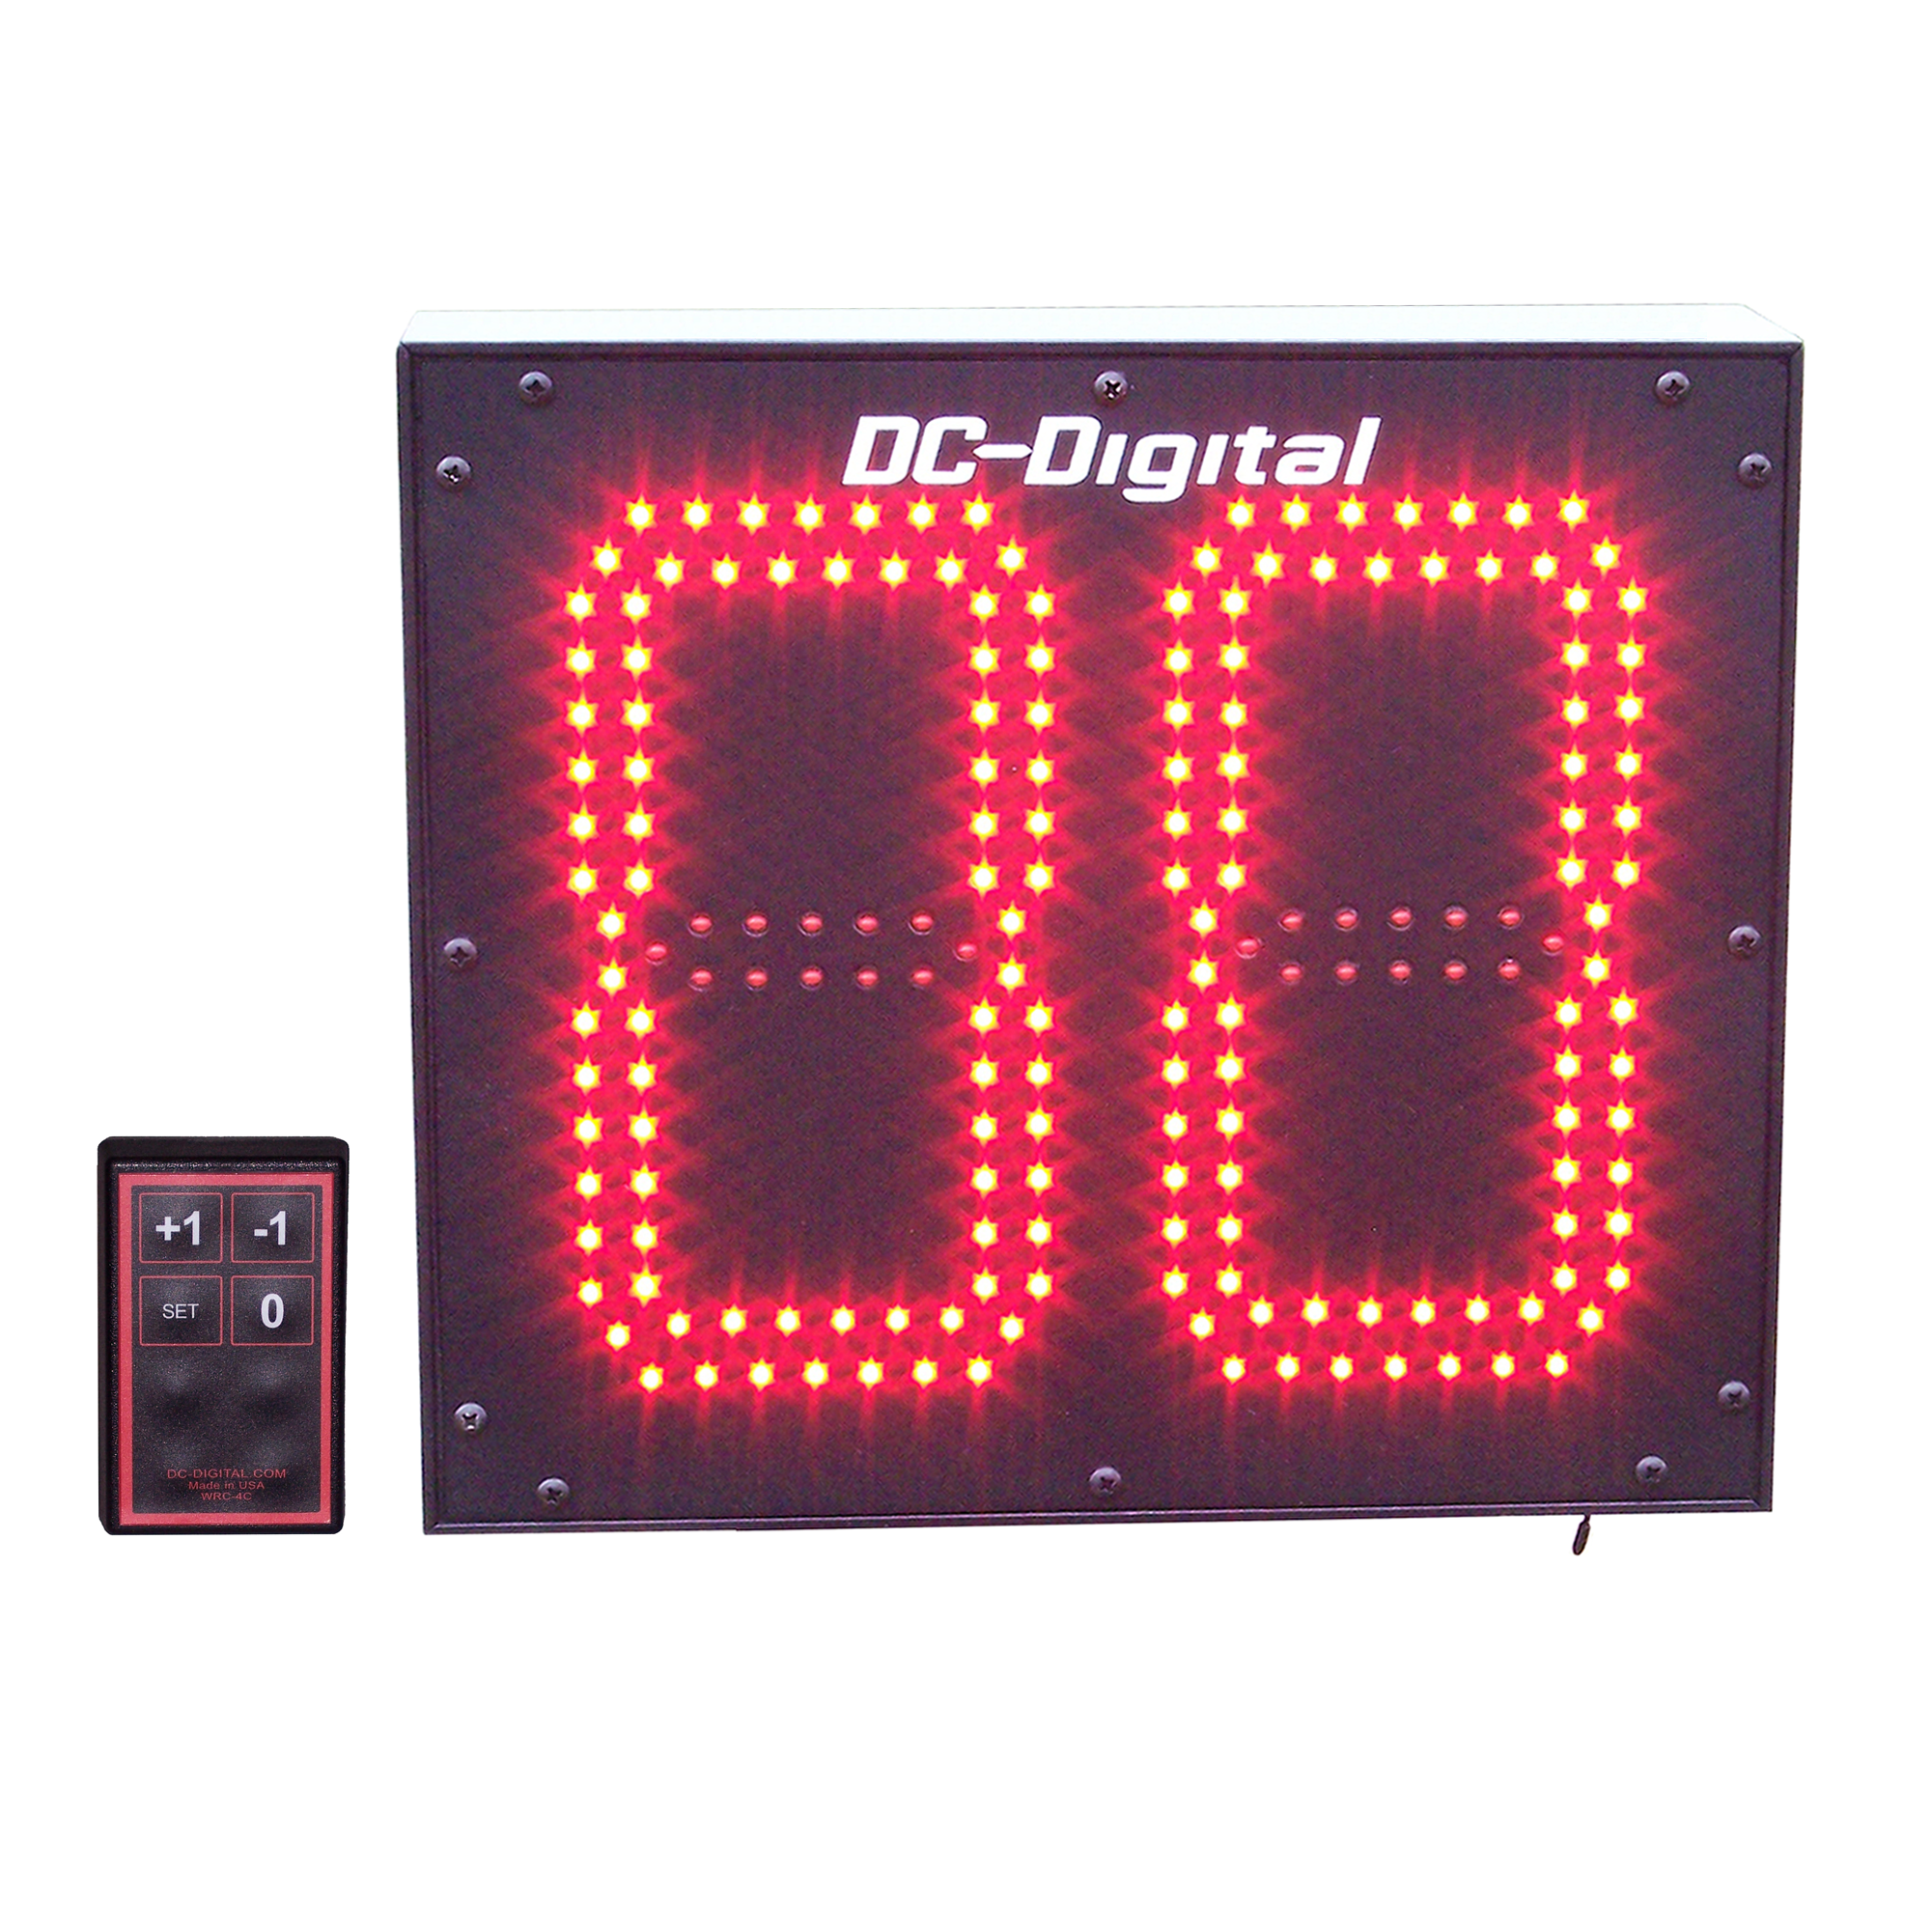 Interconnect Gedehams tand (DC-802C-W) Customer Now Serving, 8 Inch LED Electronic Digital Counter,  Wireless RF Controlled (OUTDOOR)